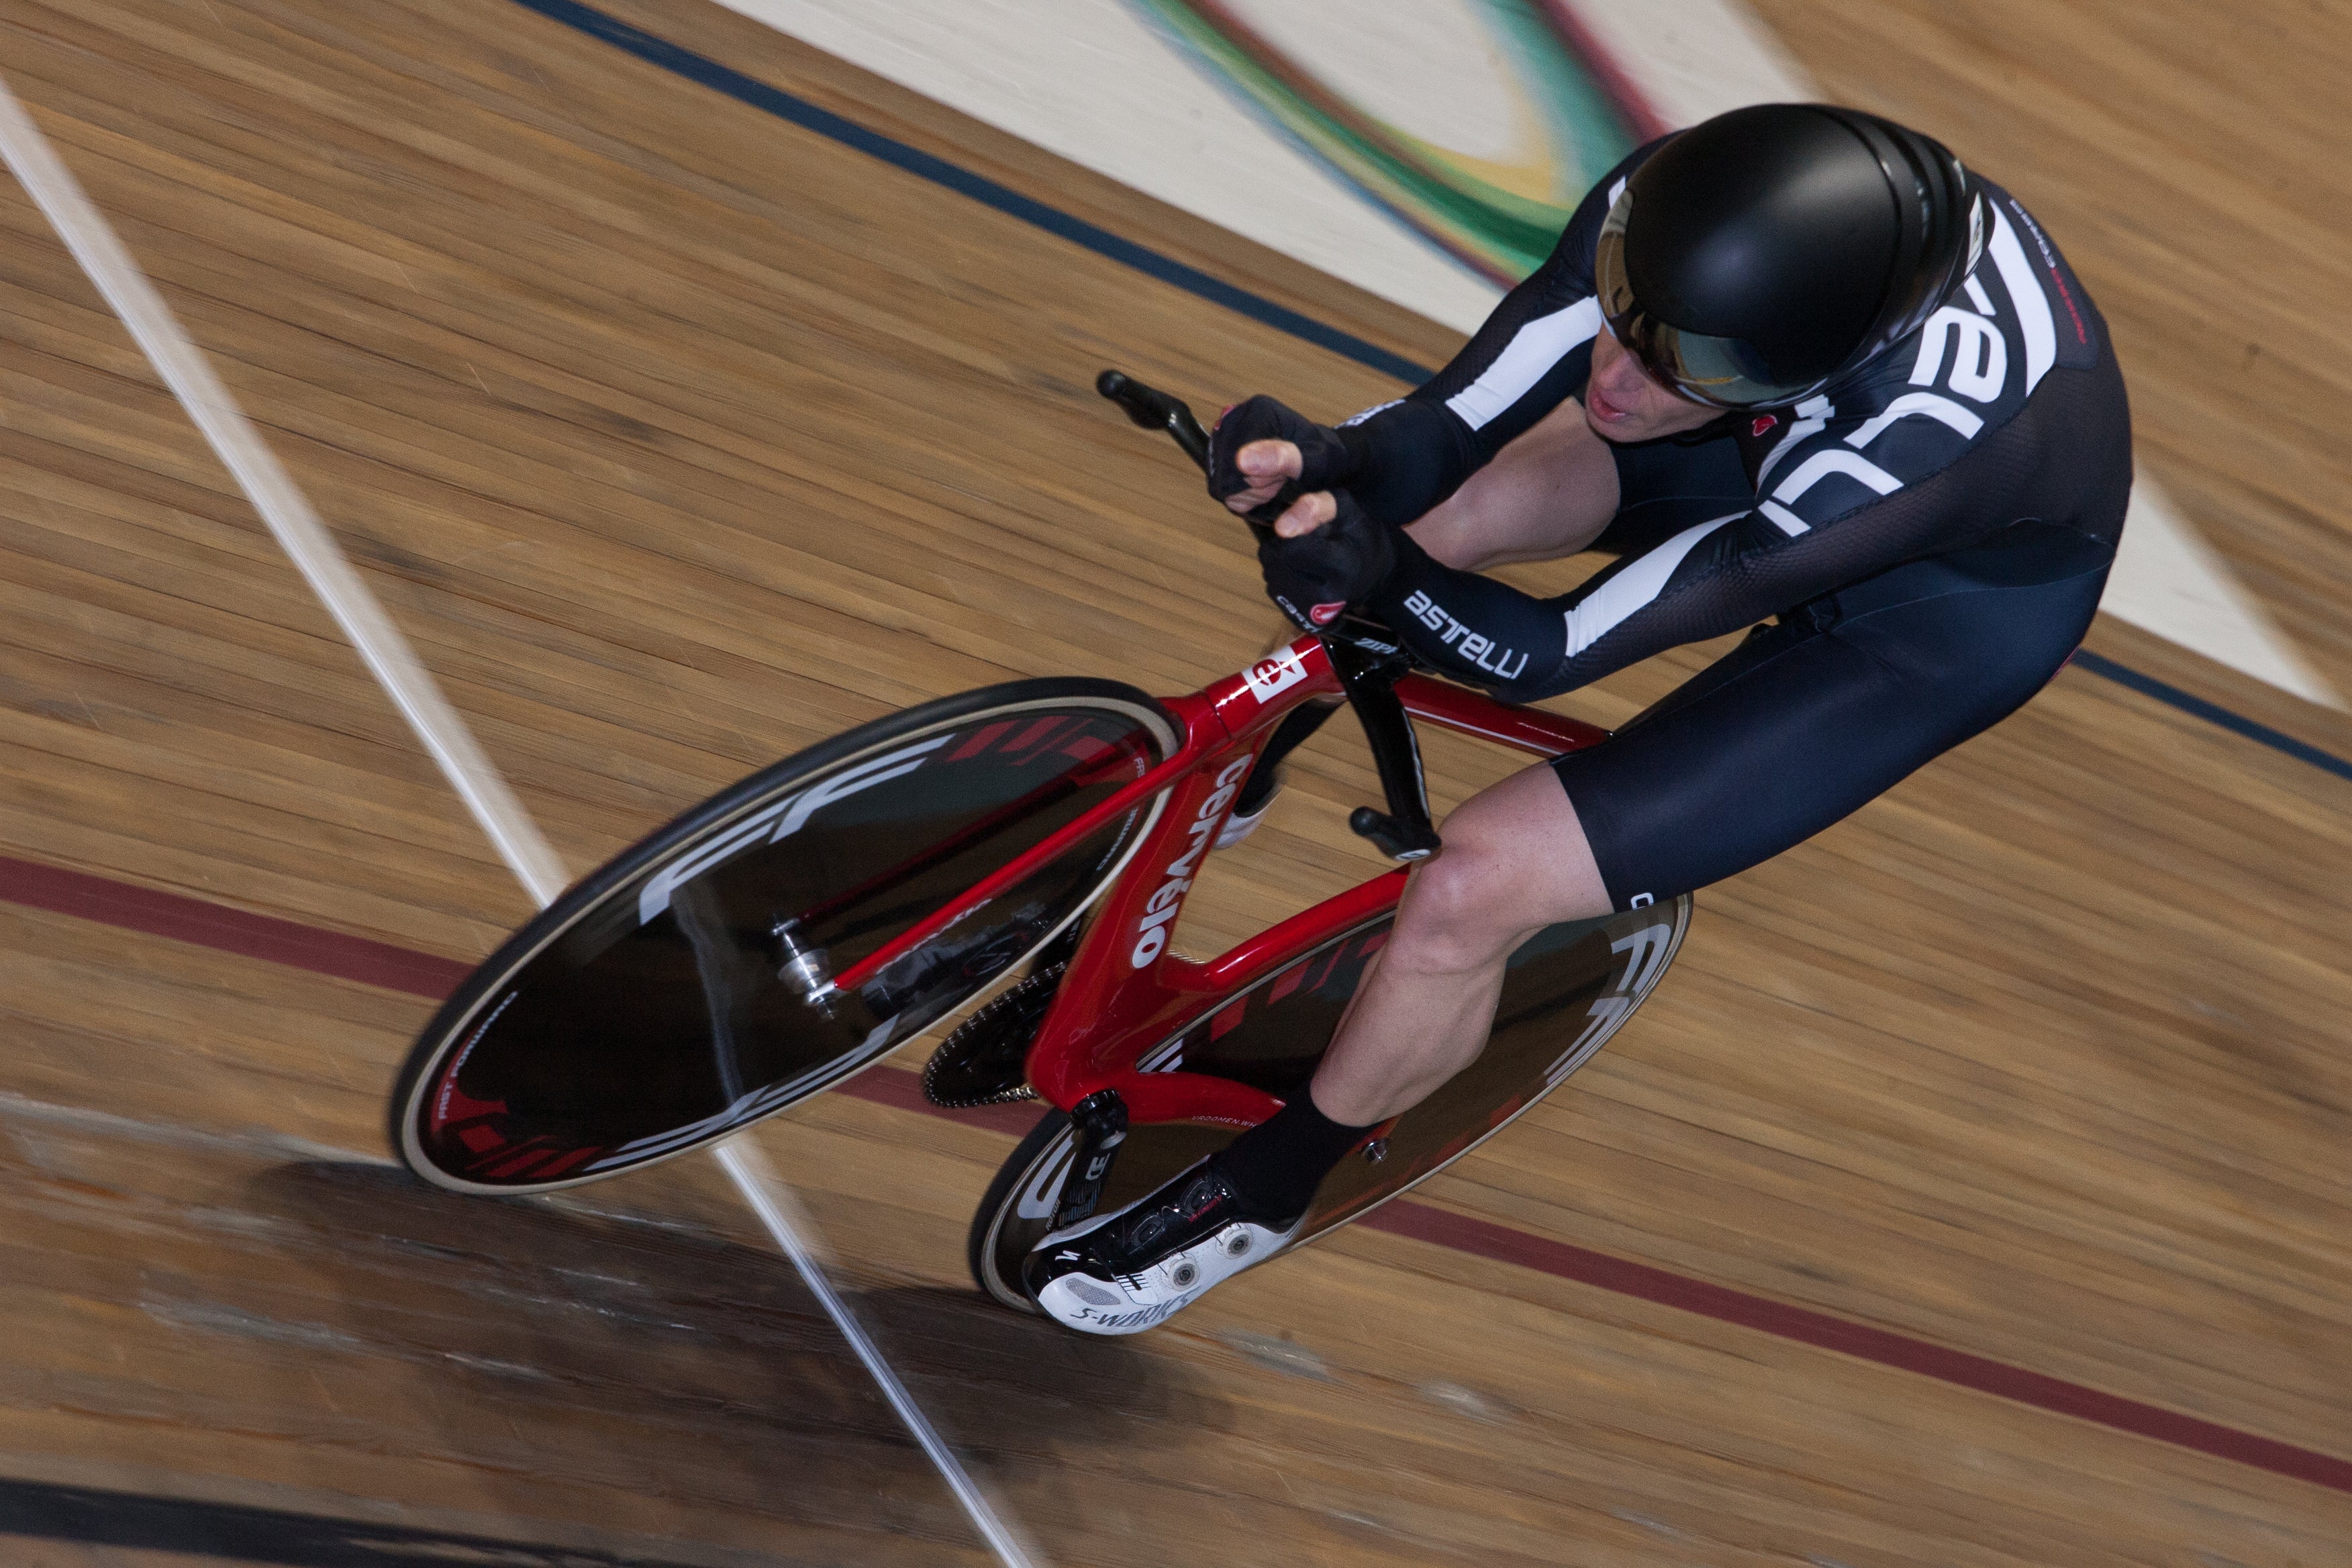 Getting my pain face on during my qualifying ride in the individual pursuit.